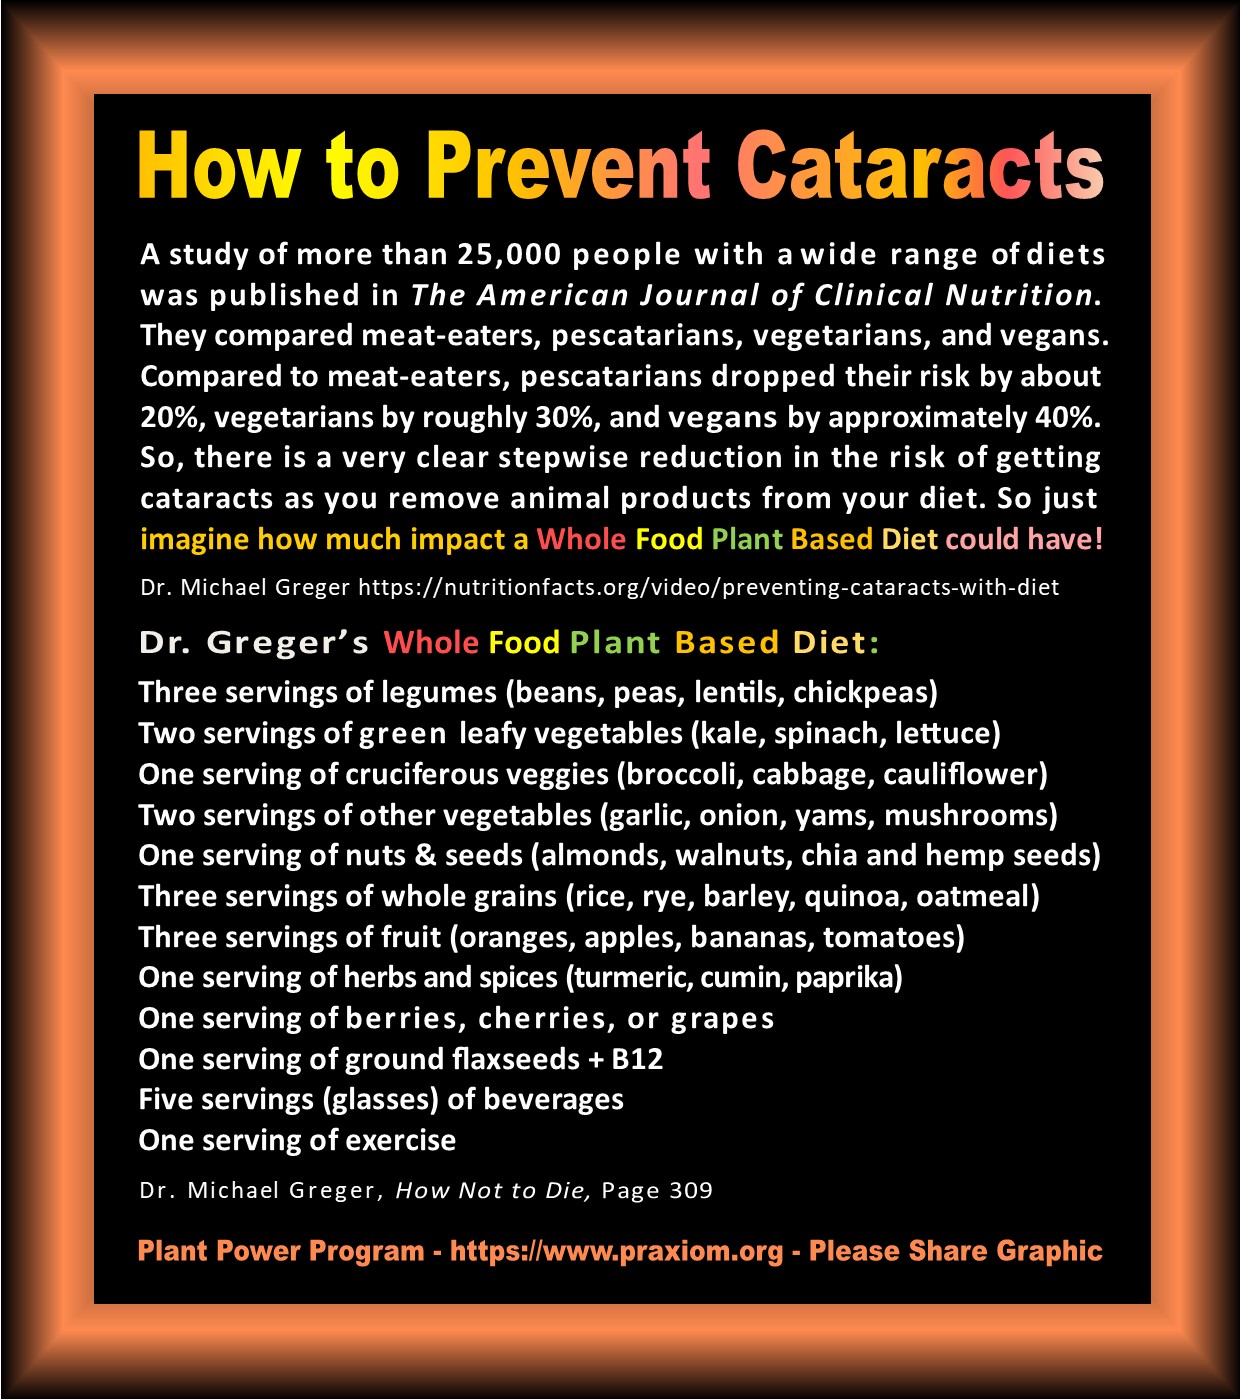 How to Use Diet to Conquer Cataracts - Dr. Michael Greger